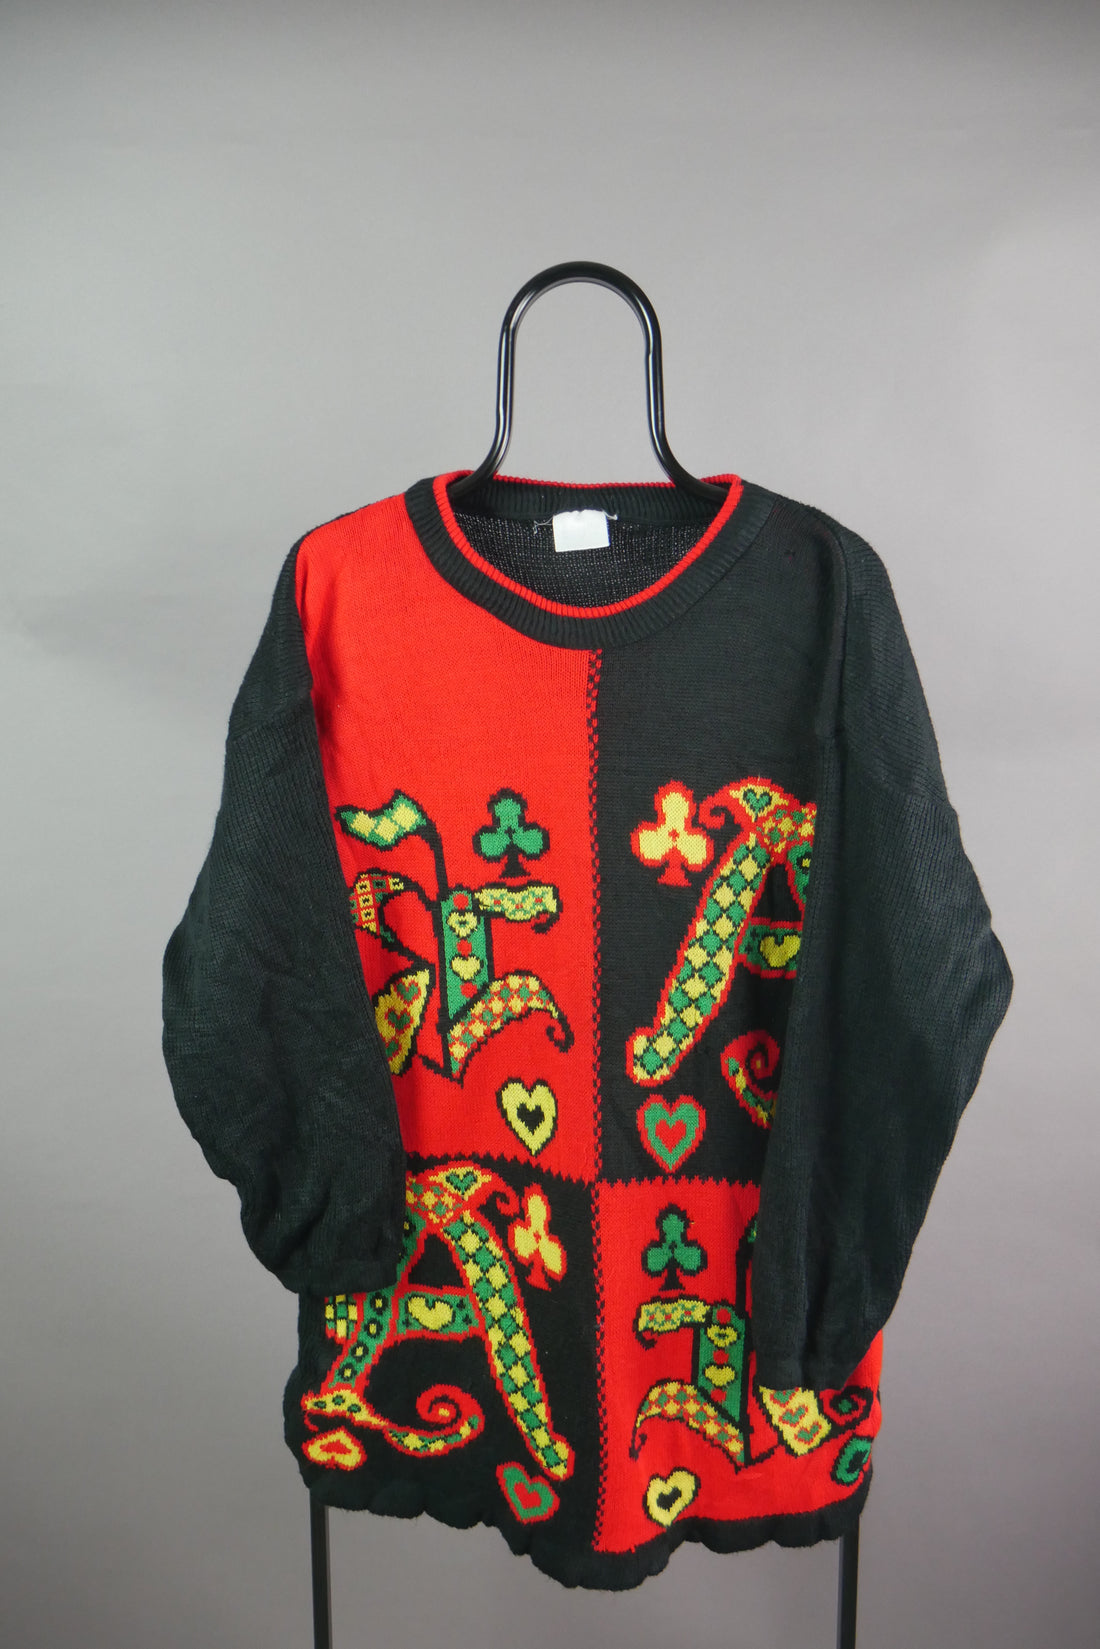 The Vintage Playing Card Style Knit Jumper (L)